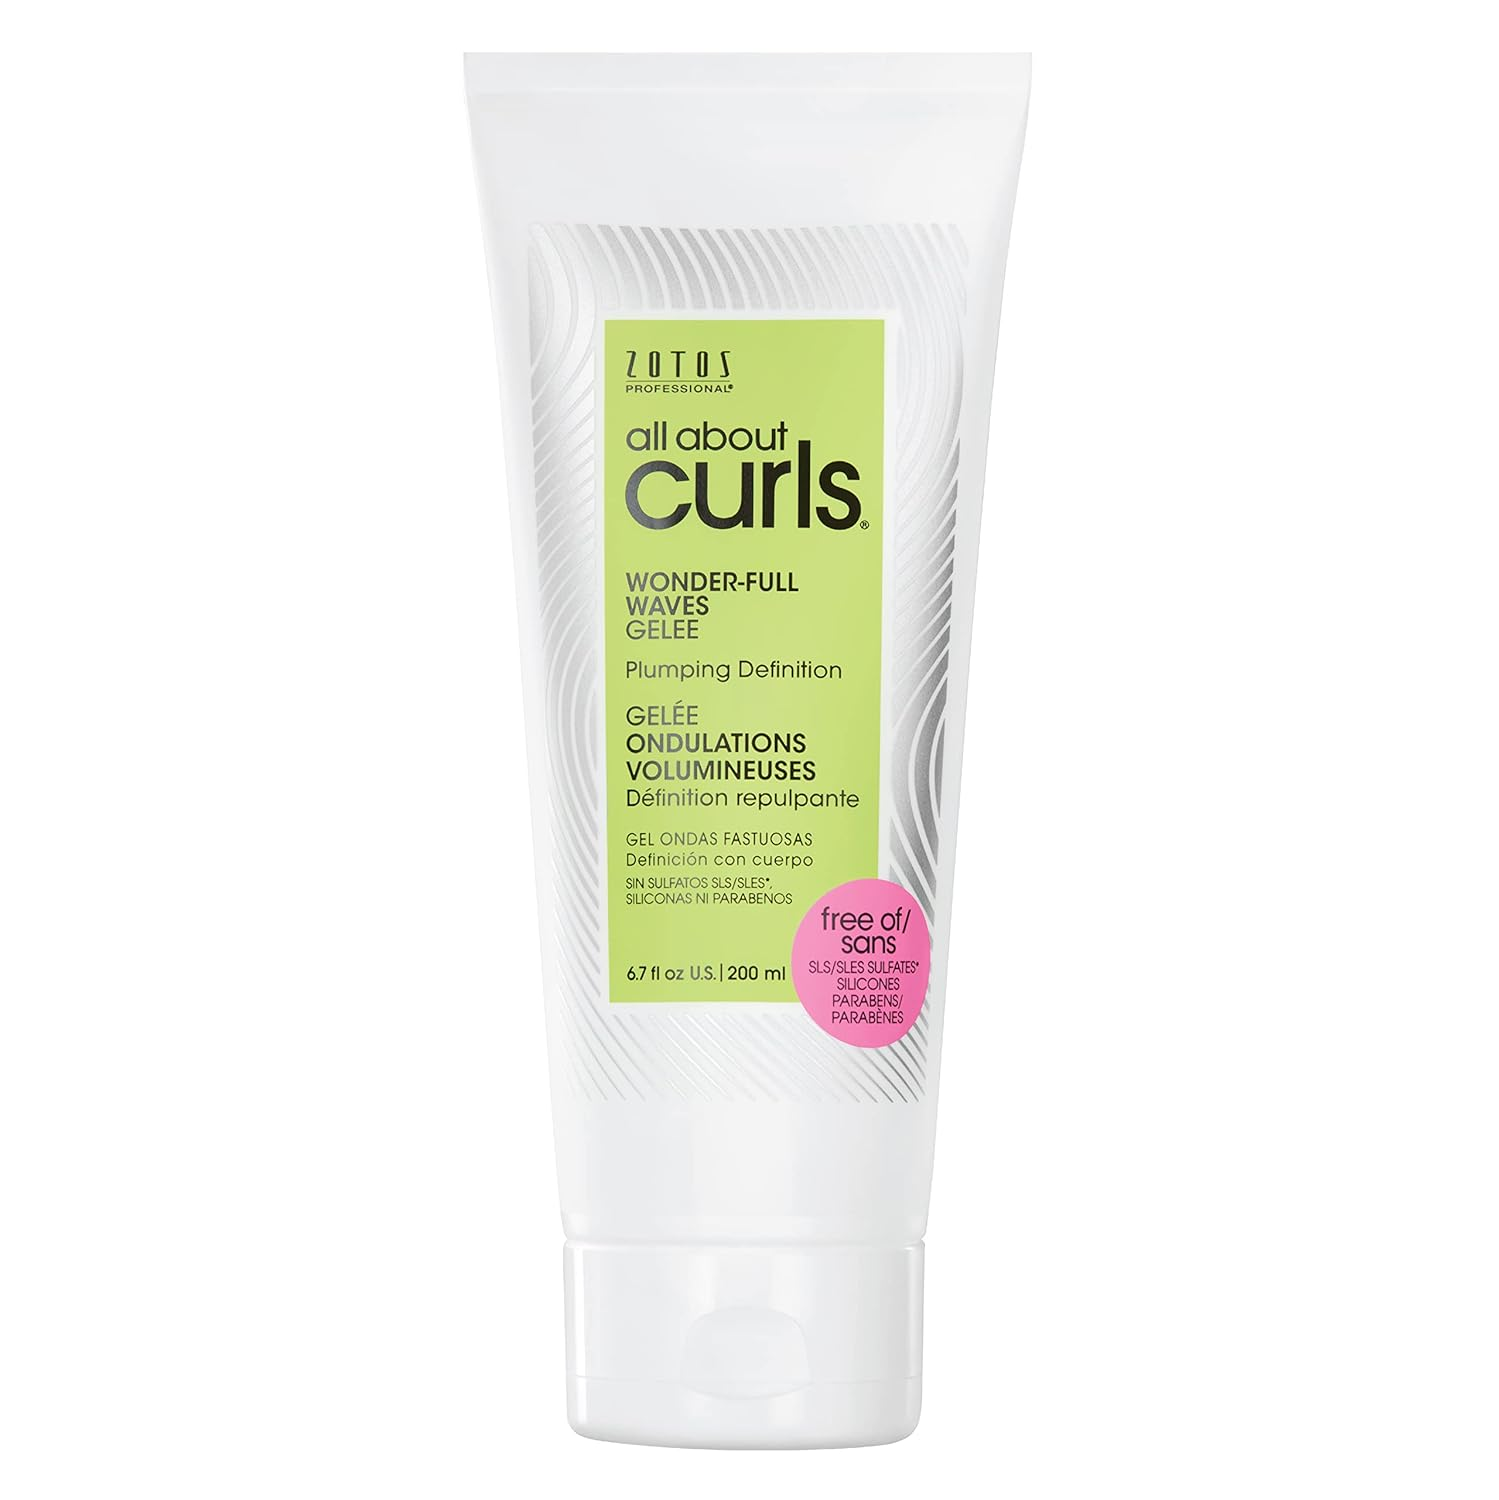 Product image of All About Curls Wonder-Full Waves Gelee, a gel that's used in a wavy hair routine